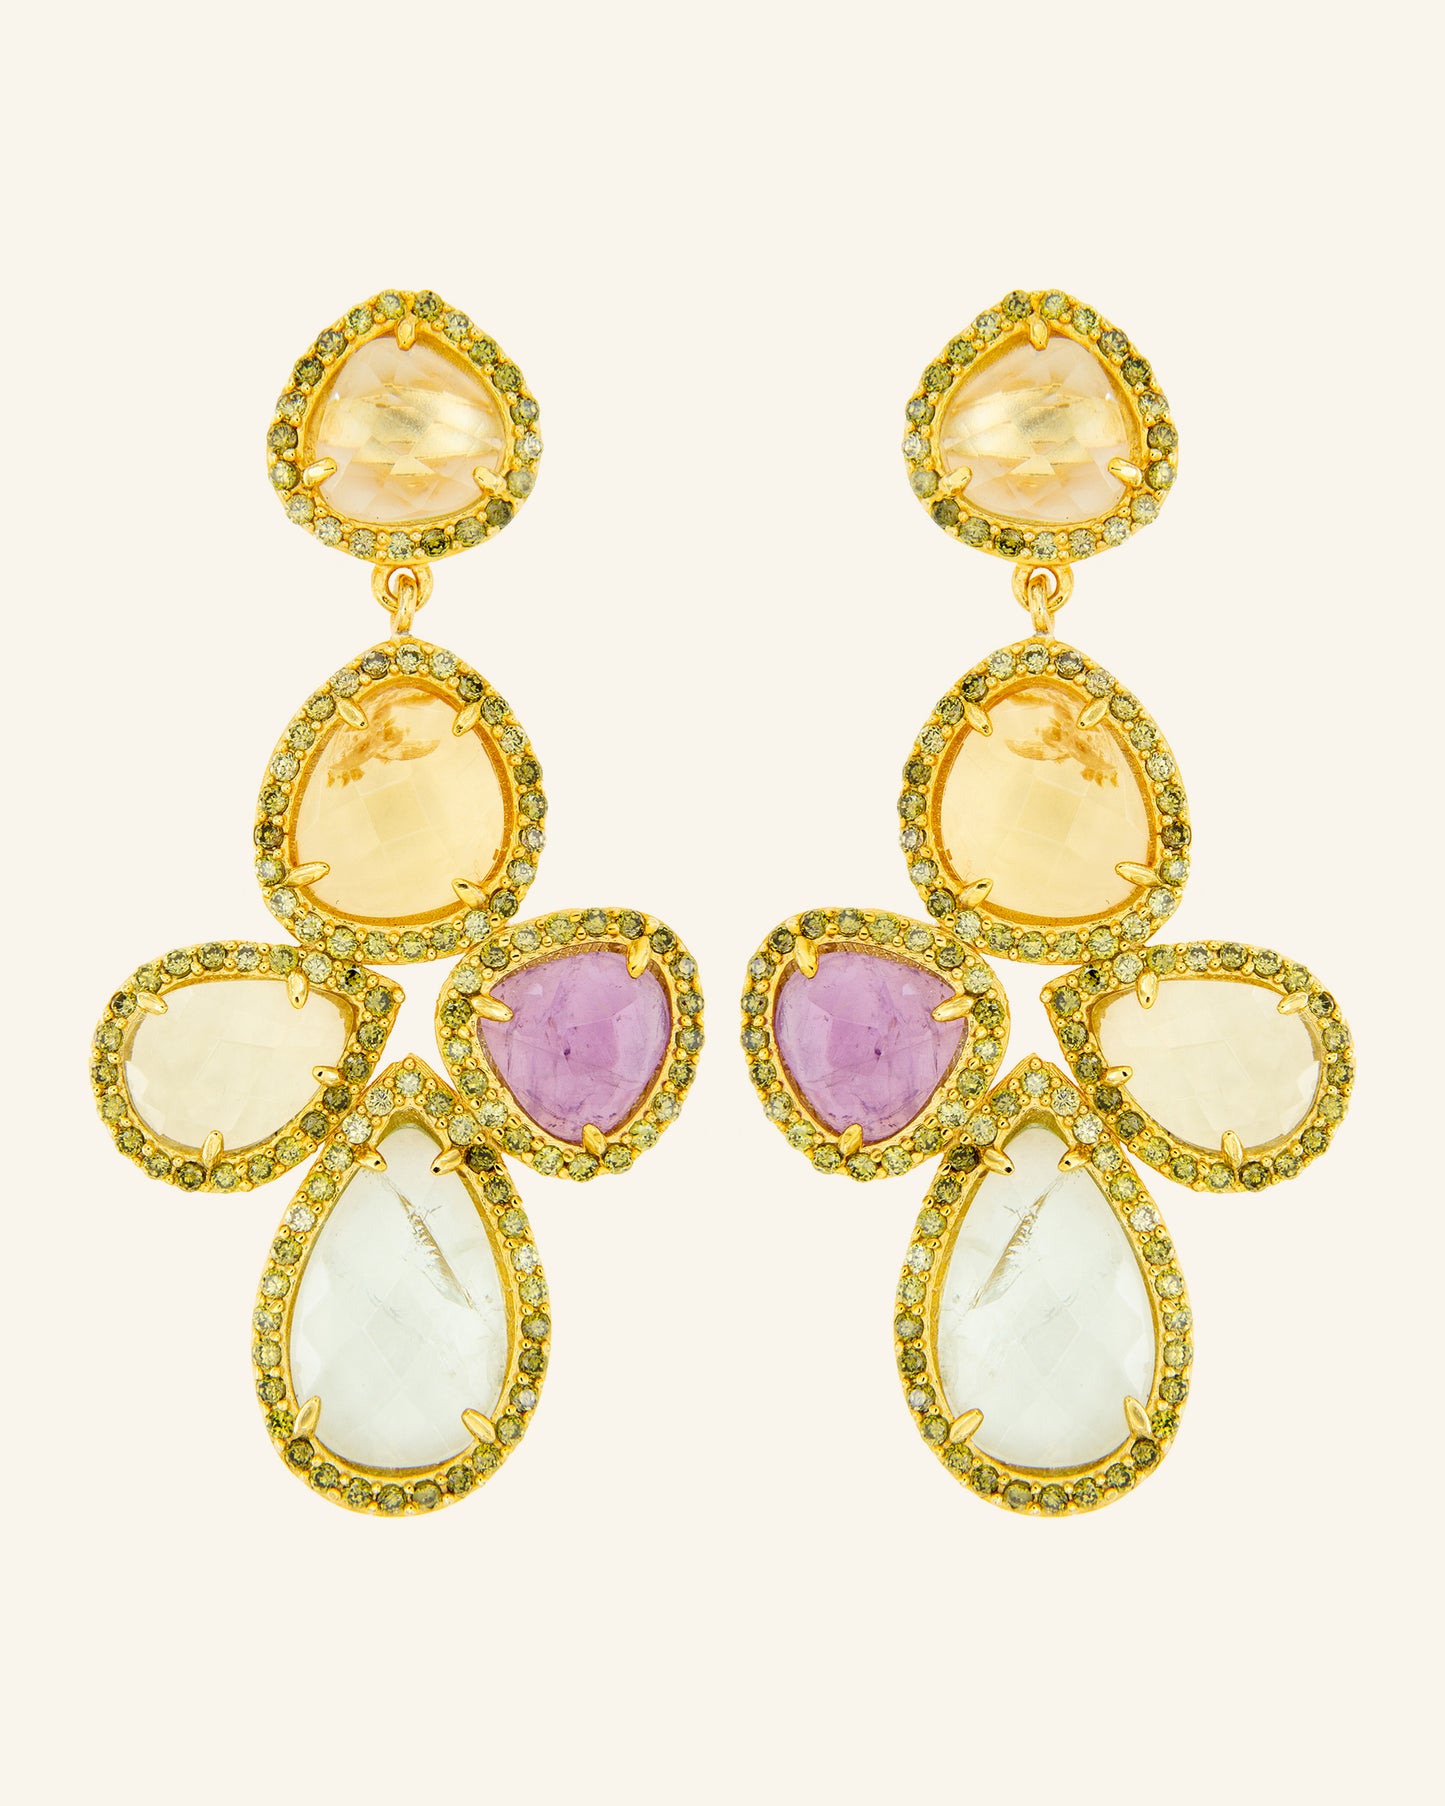 Gea earrings with amethysts and zircons